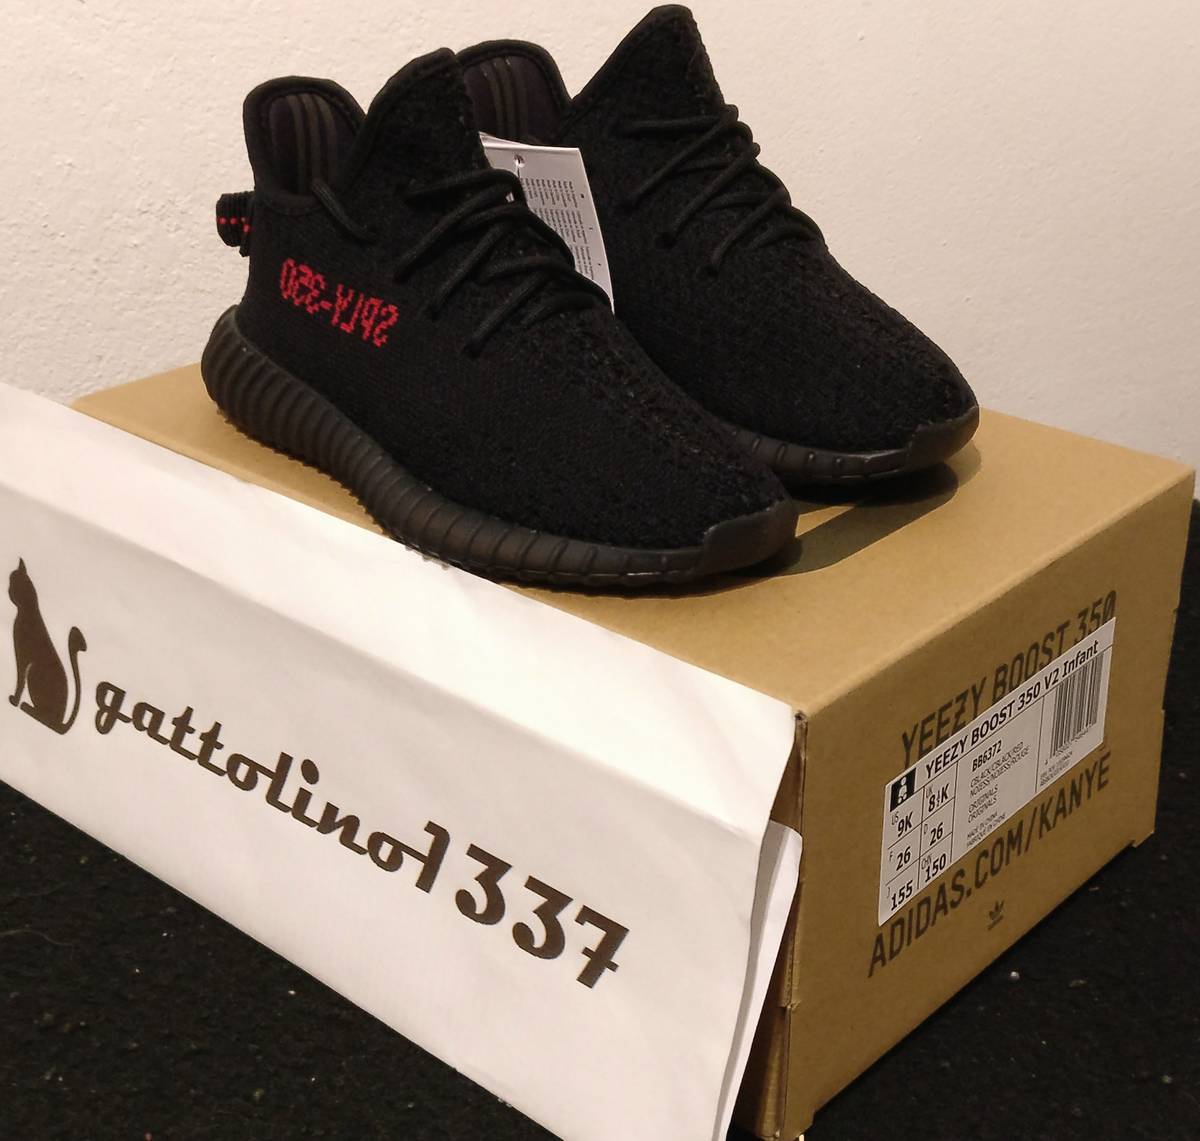 NEW Adidas Yeezy Boost 350 V 2 Core Black Red Infant Shoes